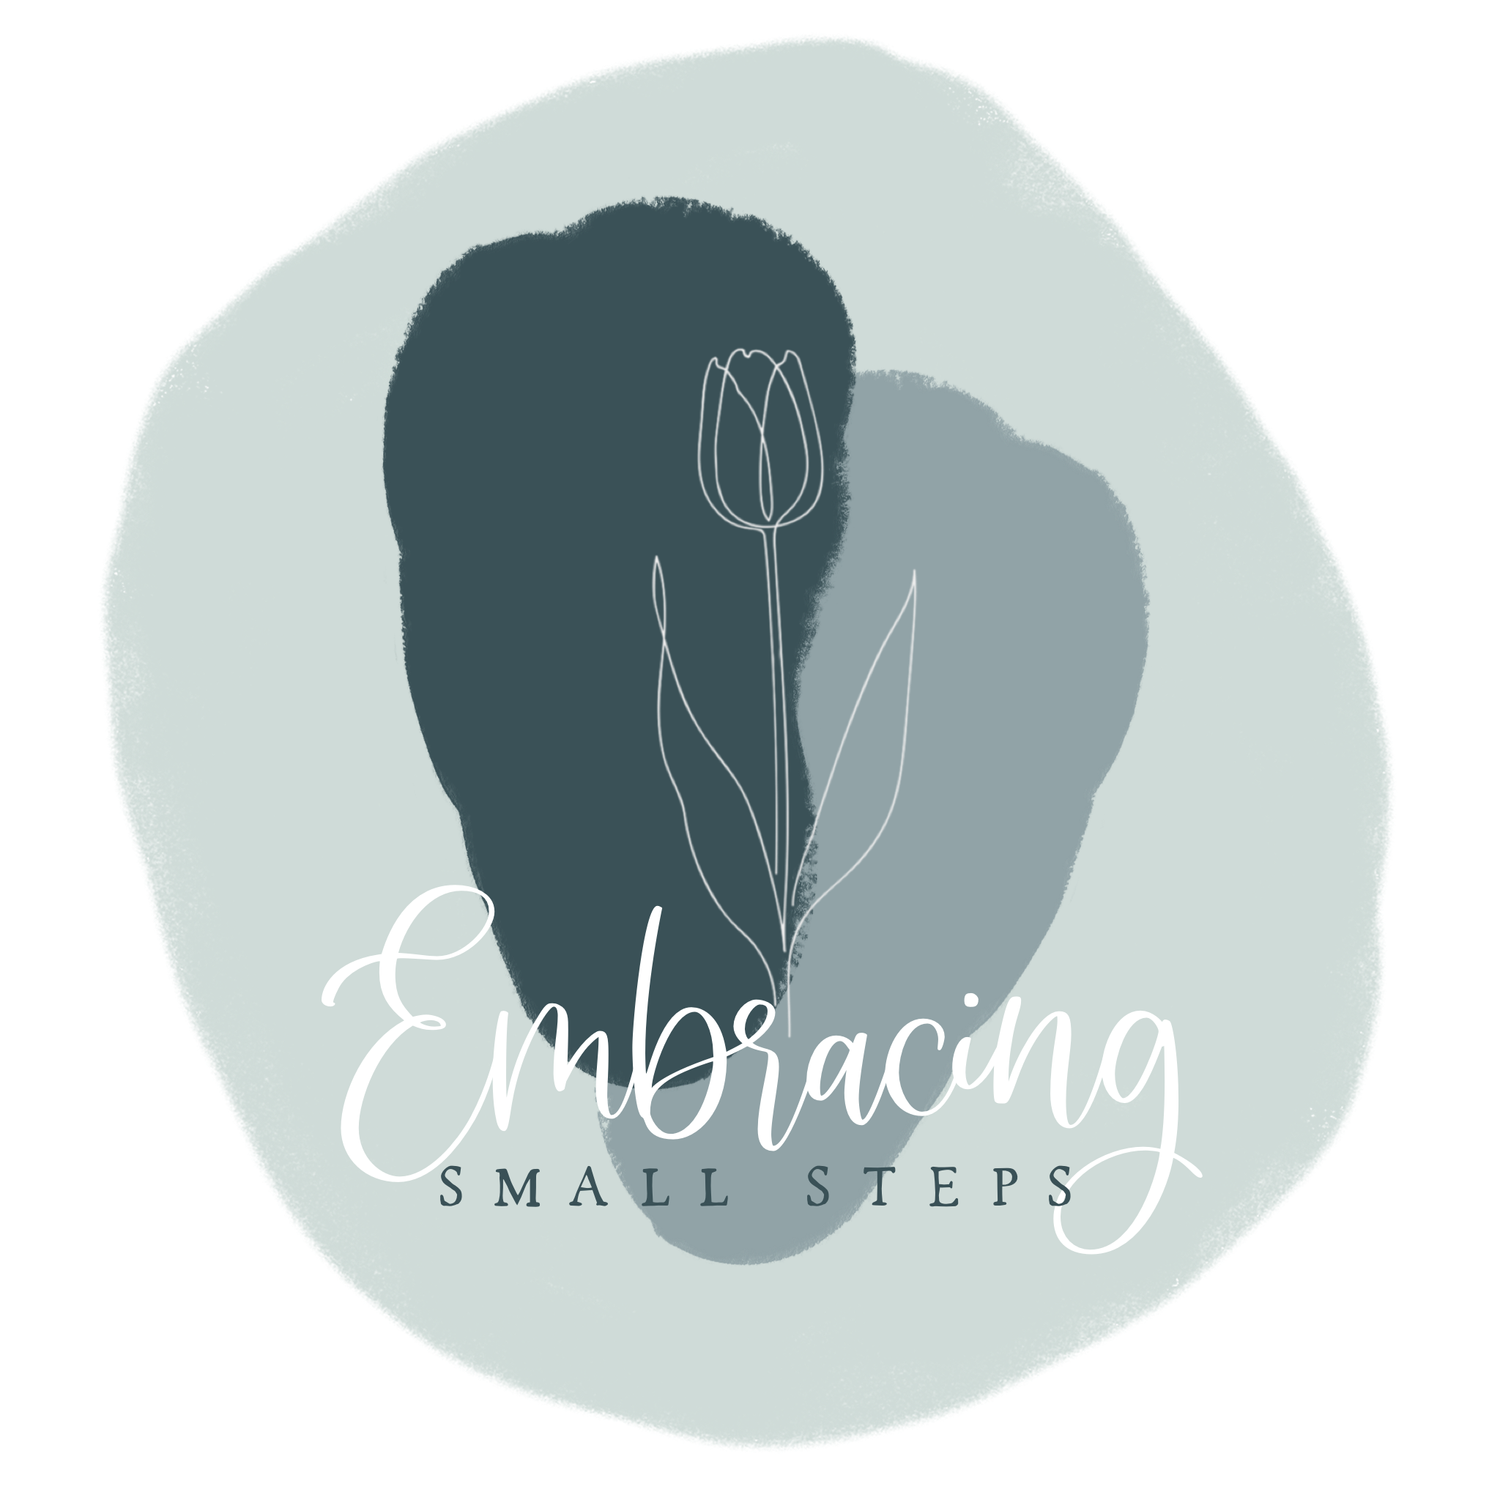 Embracing Small Steps